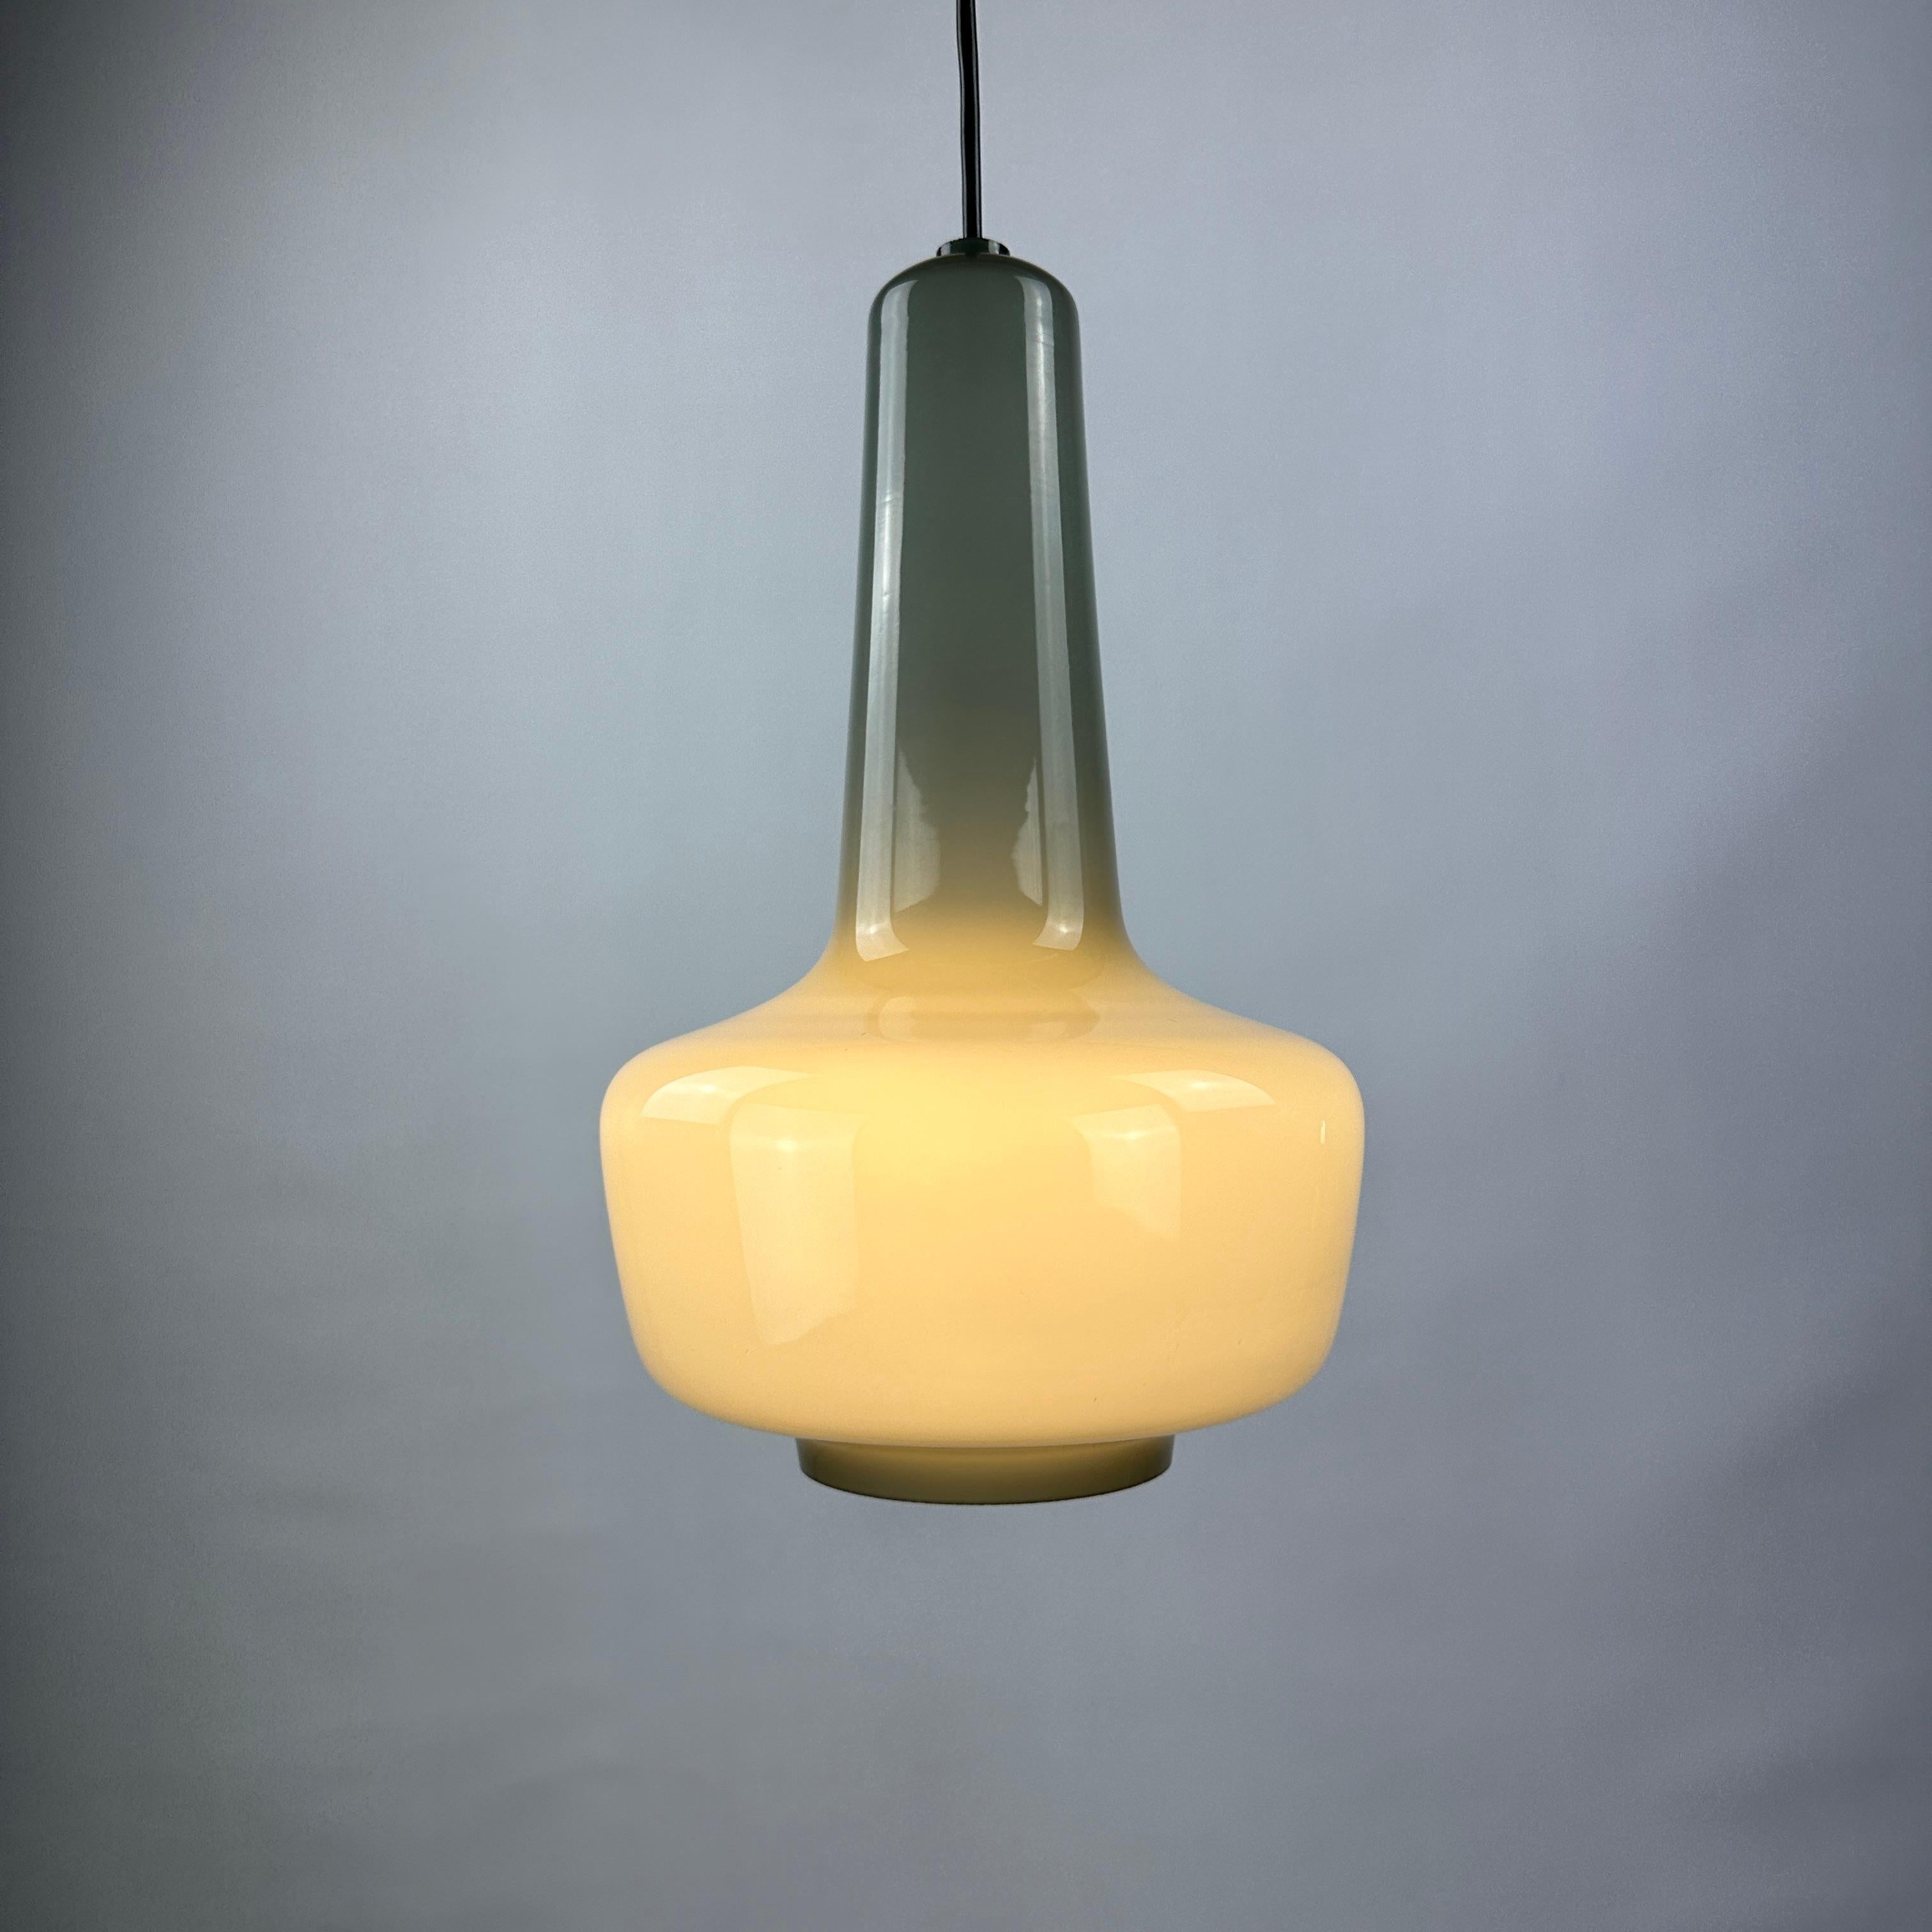 Grey glass pendant light named Kreta designed by Jacob Bang and made by Holmegaard and designed by Fog & Mørup around the 1960's. 

A danish design classic.

This color is more rare on the market.

DIMENSIONS

Height: 38cm
Diameter: 24cm
Cord